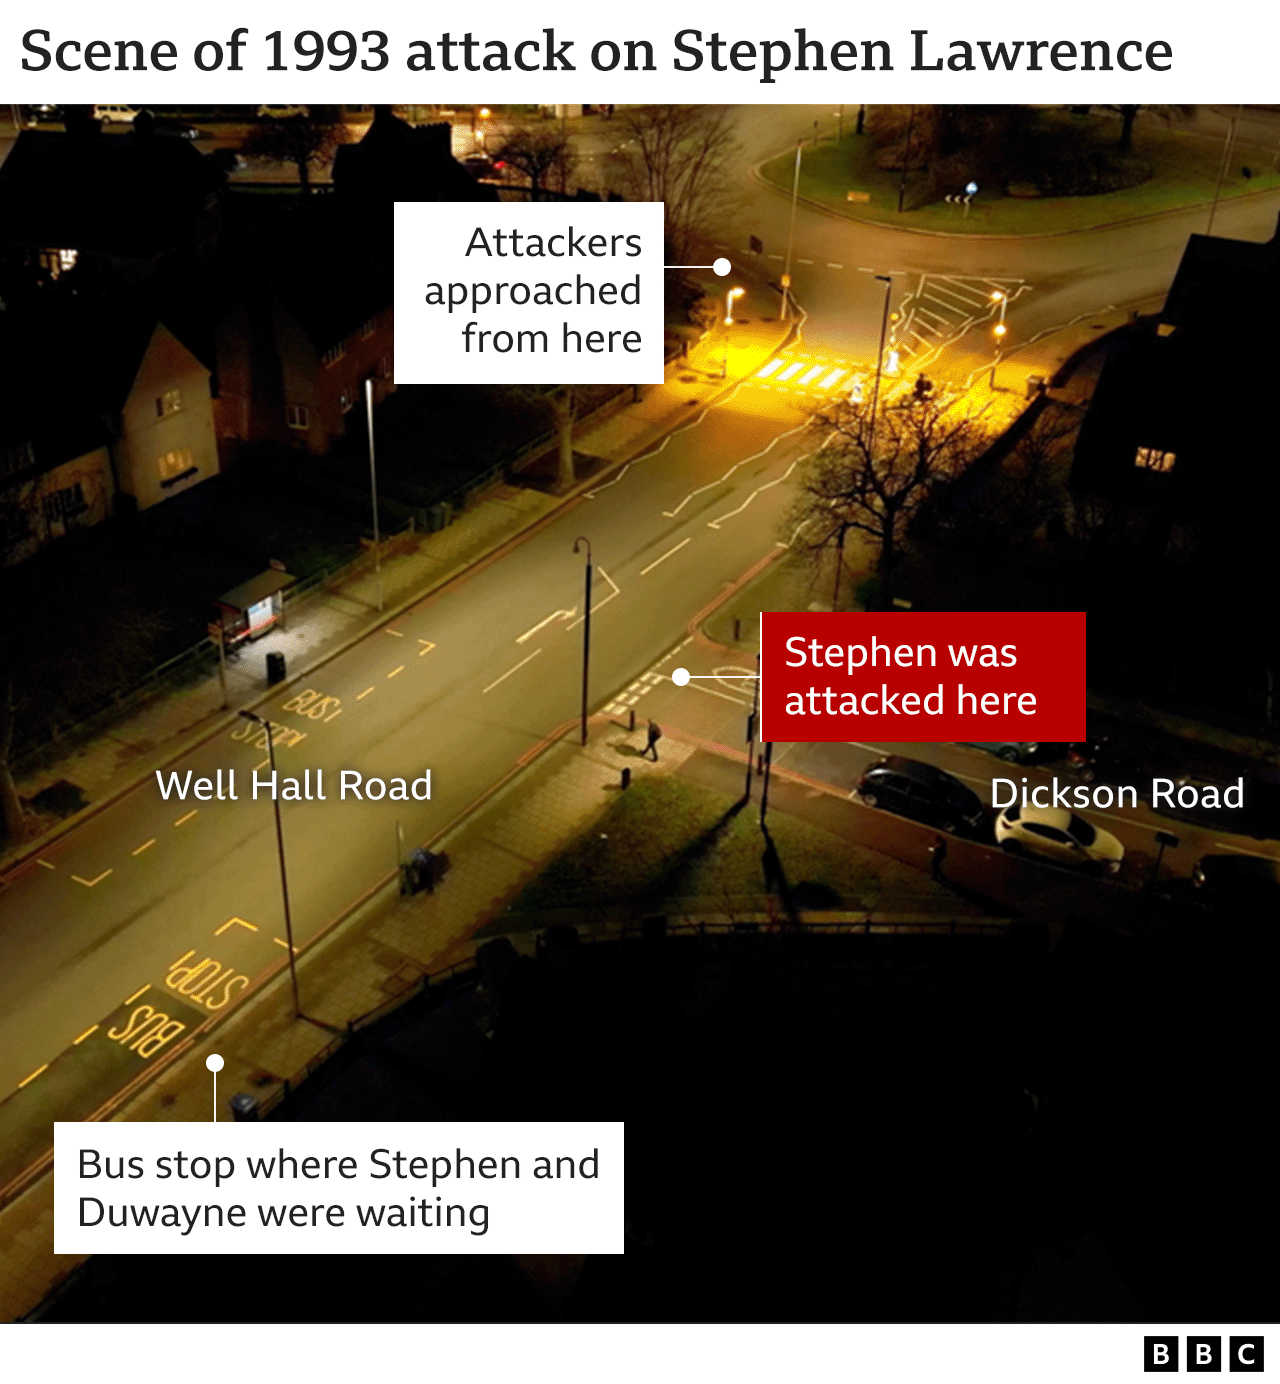 An aerial view of the street where the attack happened, with labels showing the bus stop where Stephen and Duwayne were waiting, the approach of the attackers and the place where Stephen was attacked